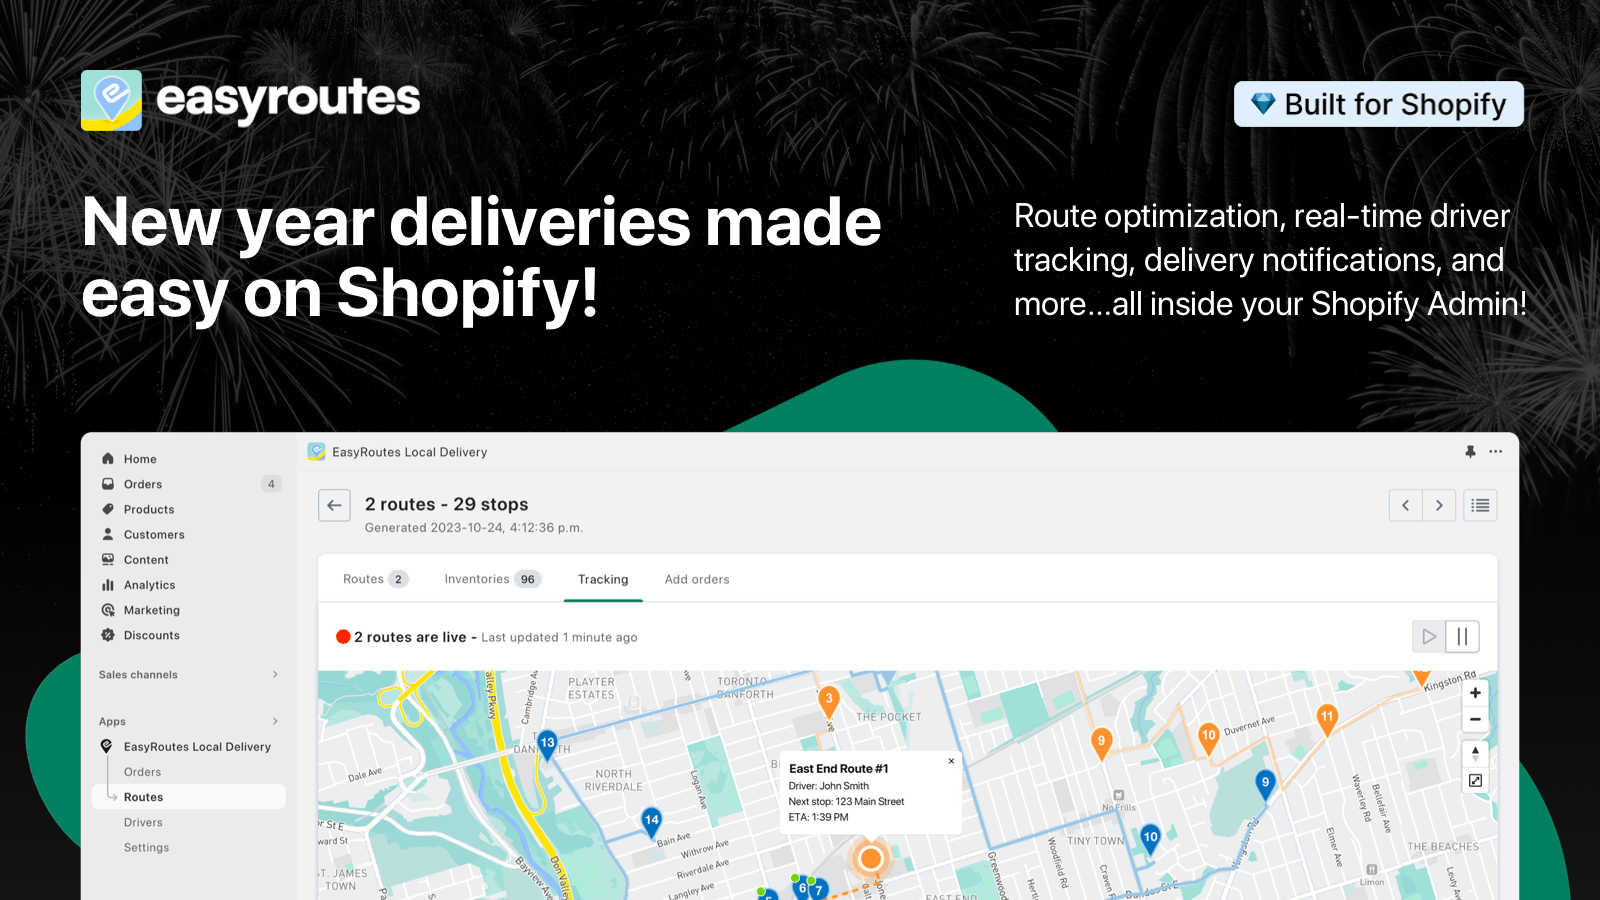 Plan optimized delivery routes, assign and schedule deliveries